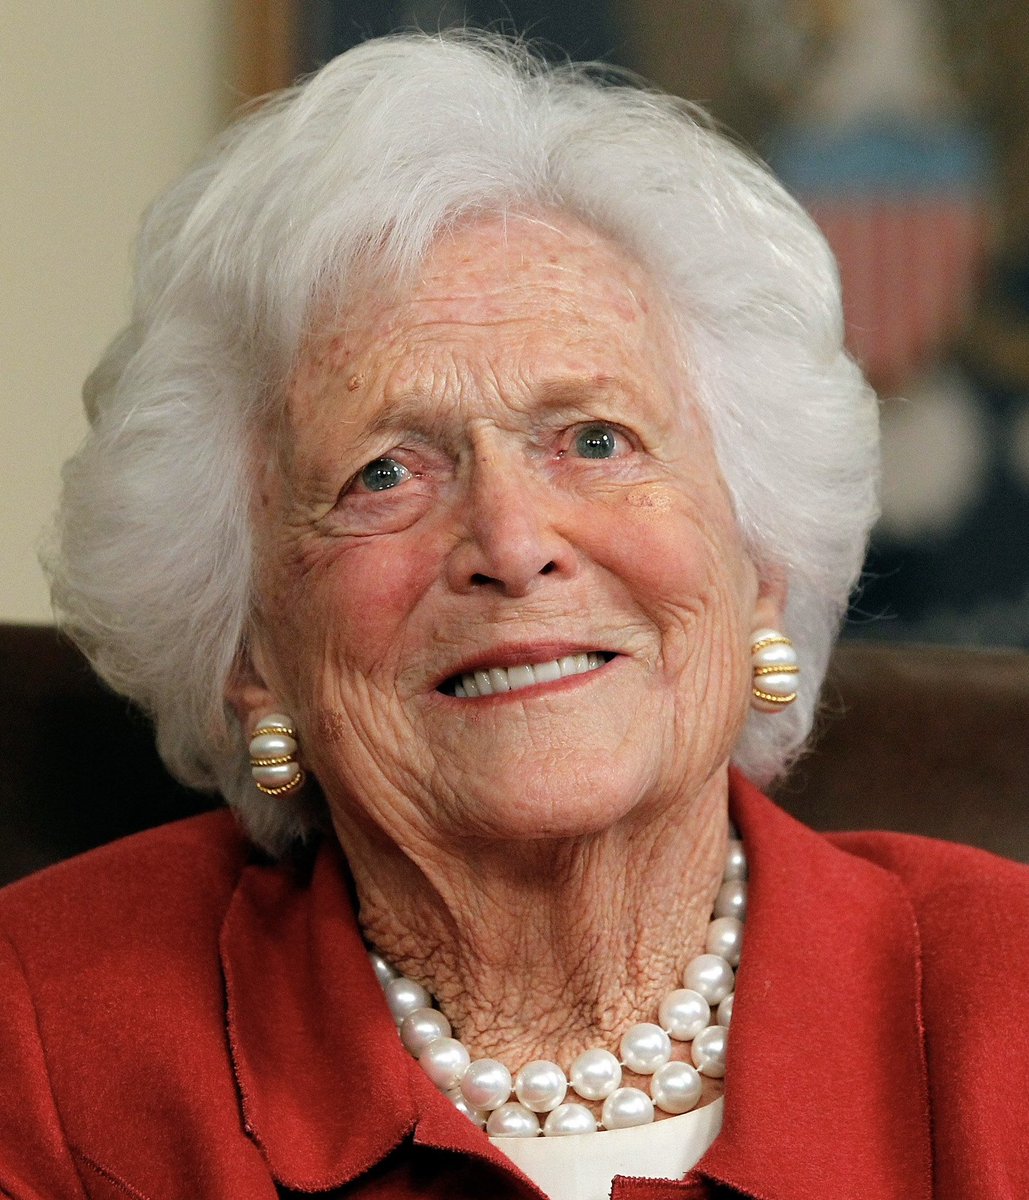 Just a reminder that Barbara Bush, wife of one president of the United States and mother to another, believed that governments had no business interfering in decisions regarding reproductive health or abortion.